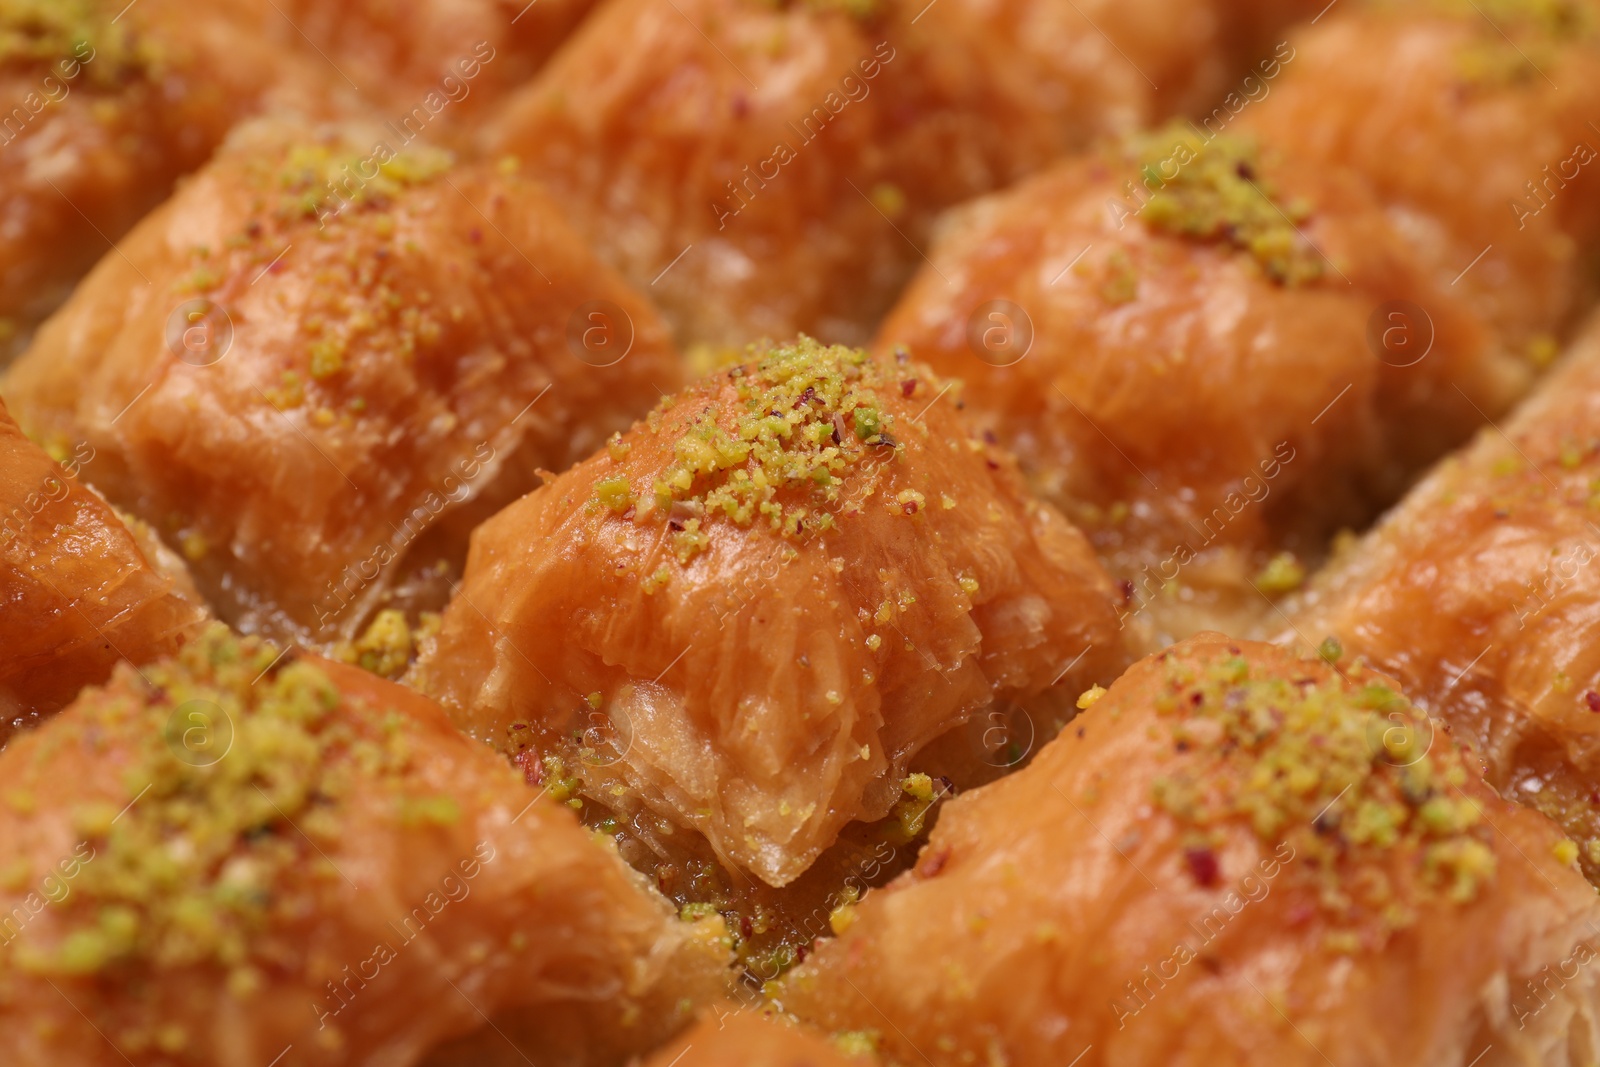 Photo of Delicious sweet baklava with pistachios as background, closeup